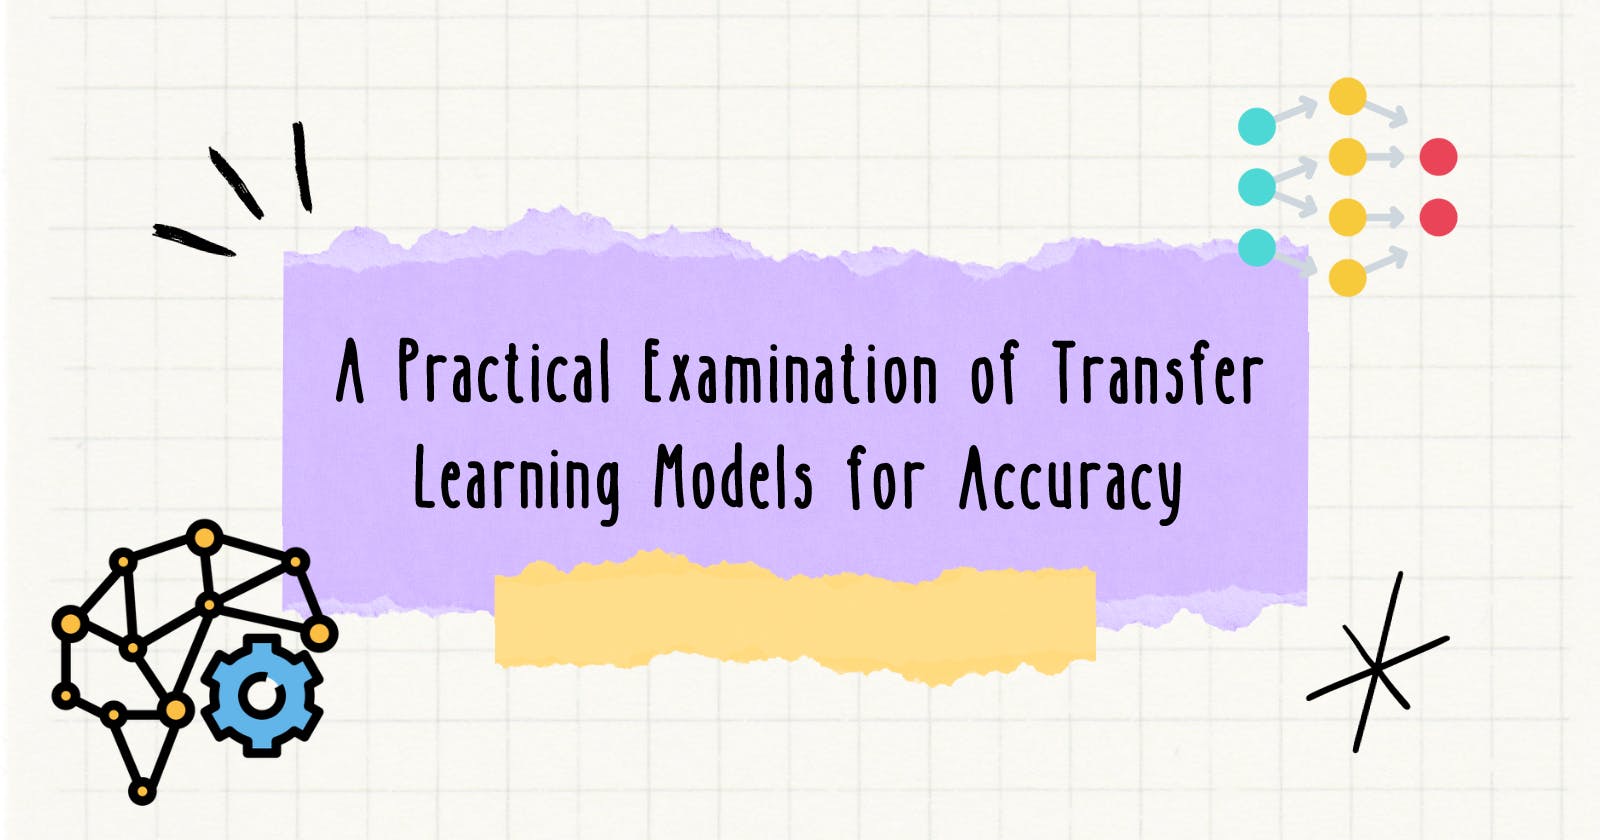 Comparing the Accuracy of 4 Commonly Used Models in Transfer Learning